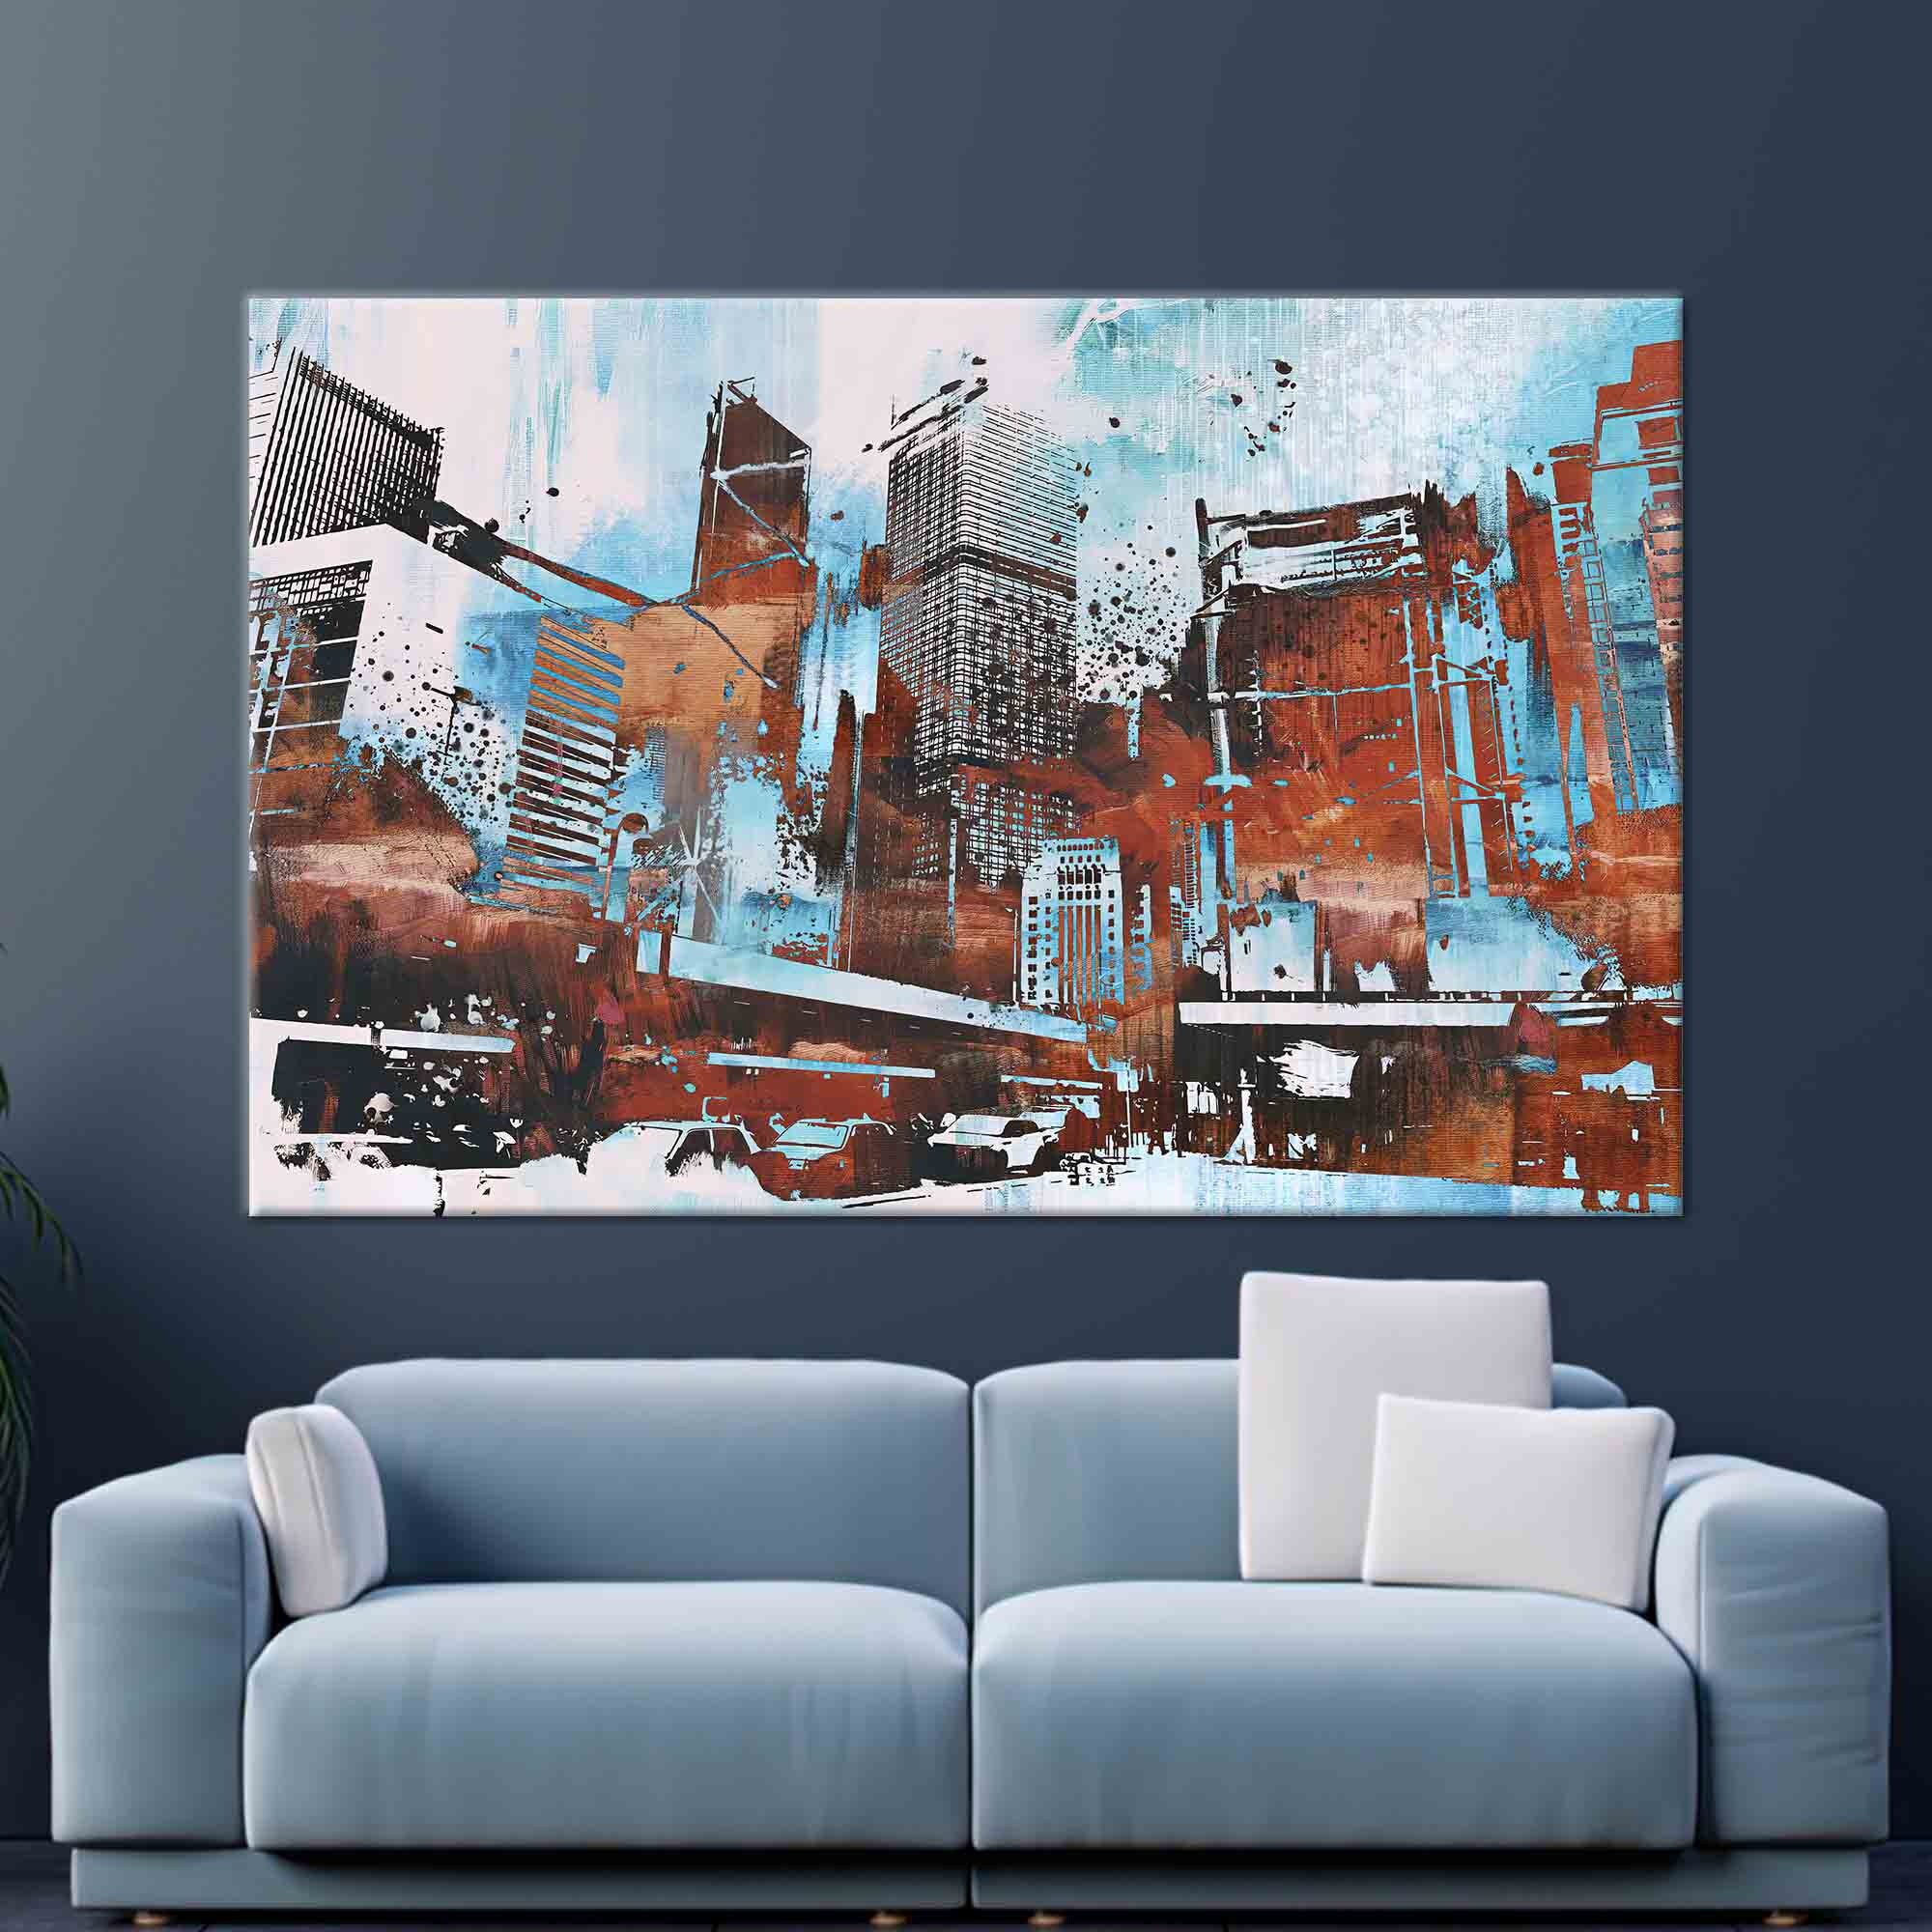 3D wallpaper,New York city beautiful night,building and Bridge under the  colorful light,living room TV wall bedroom large murals - AliExpress